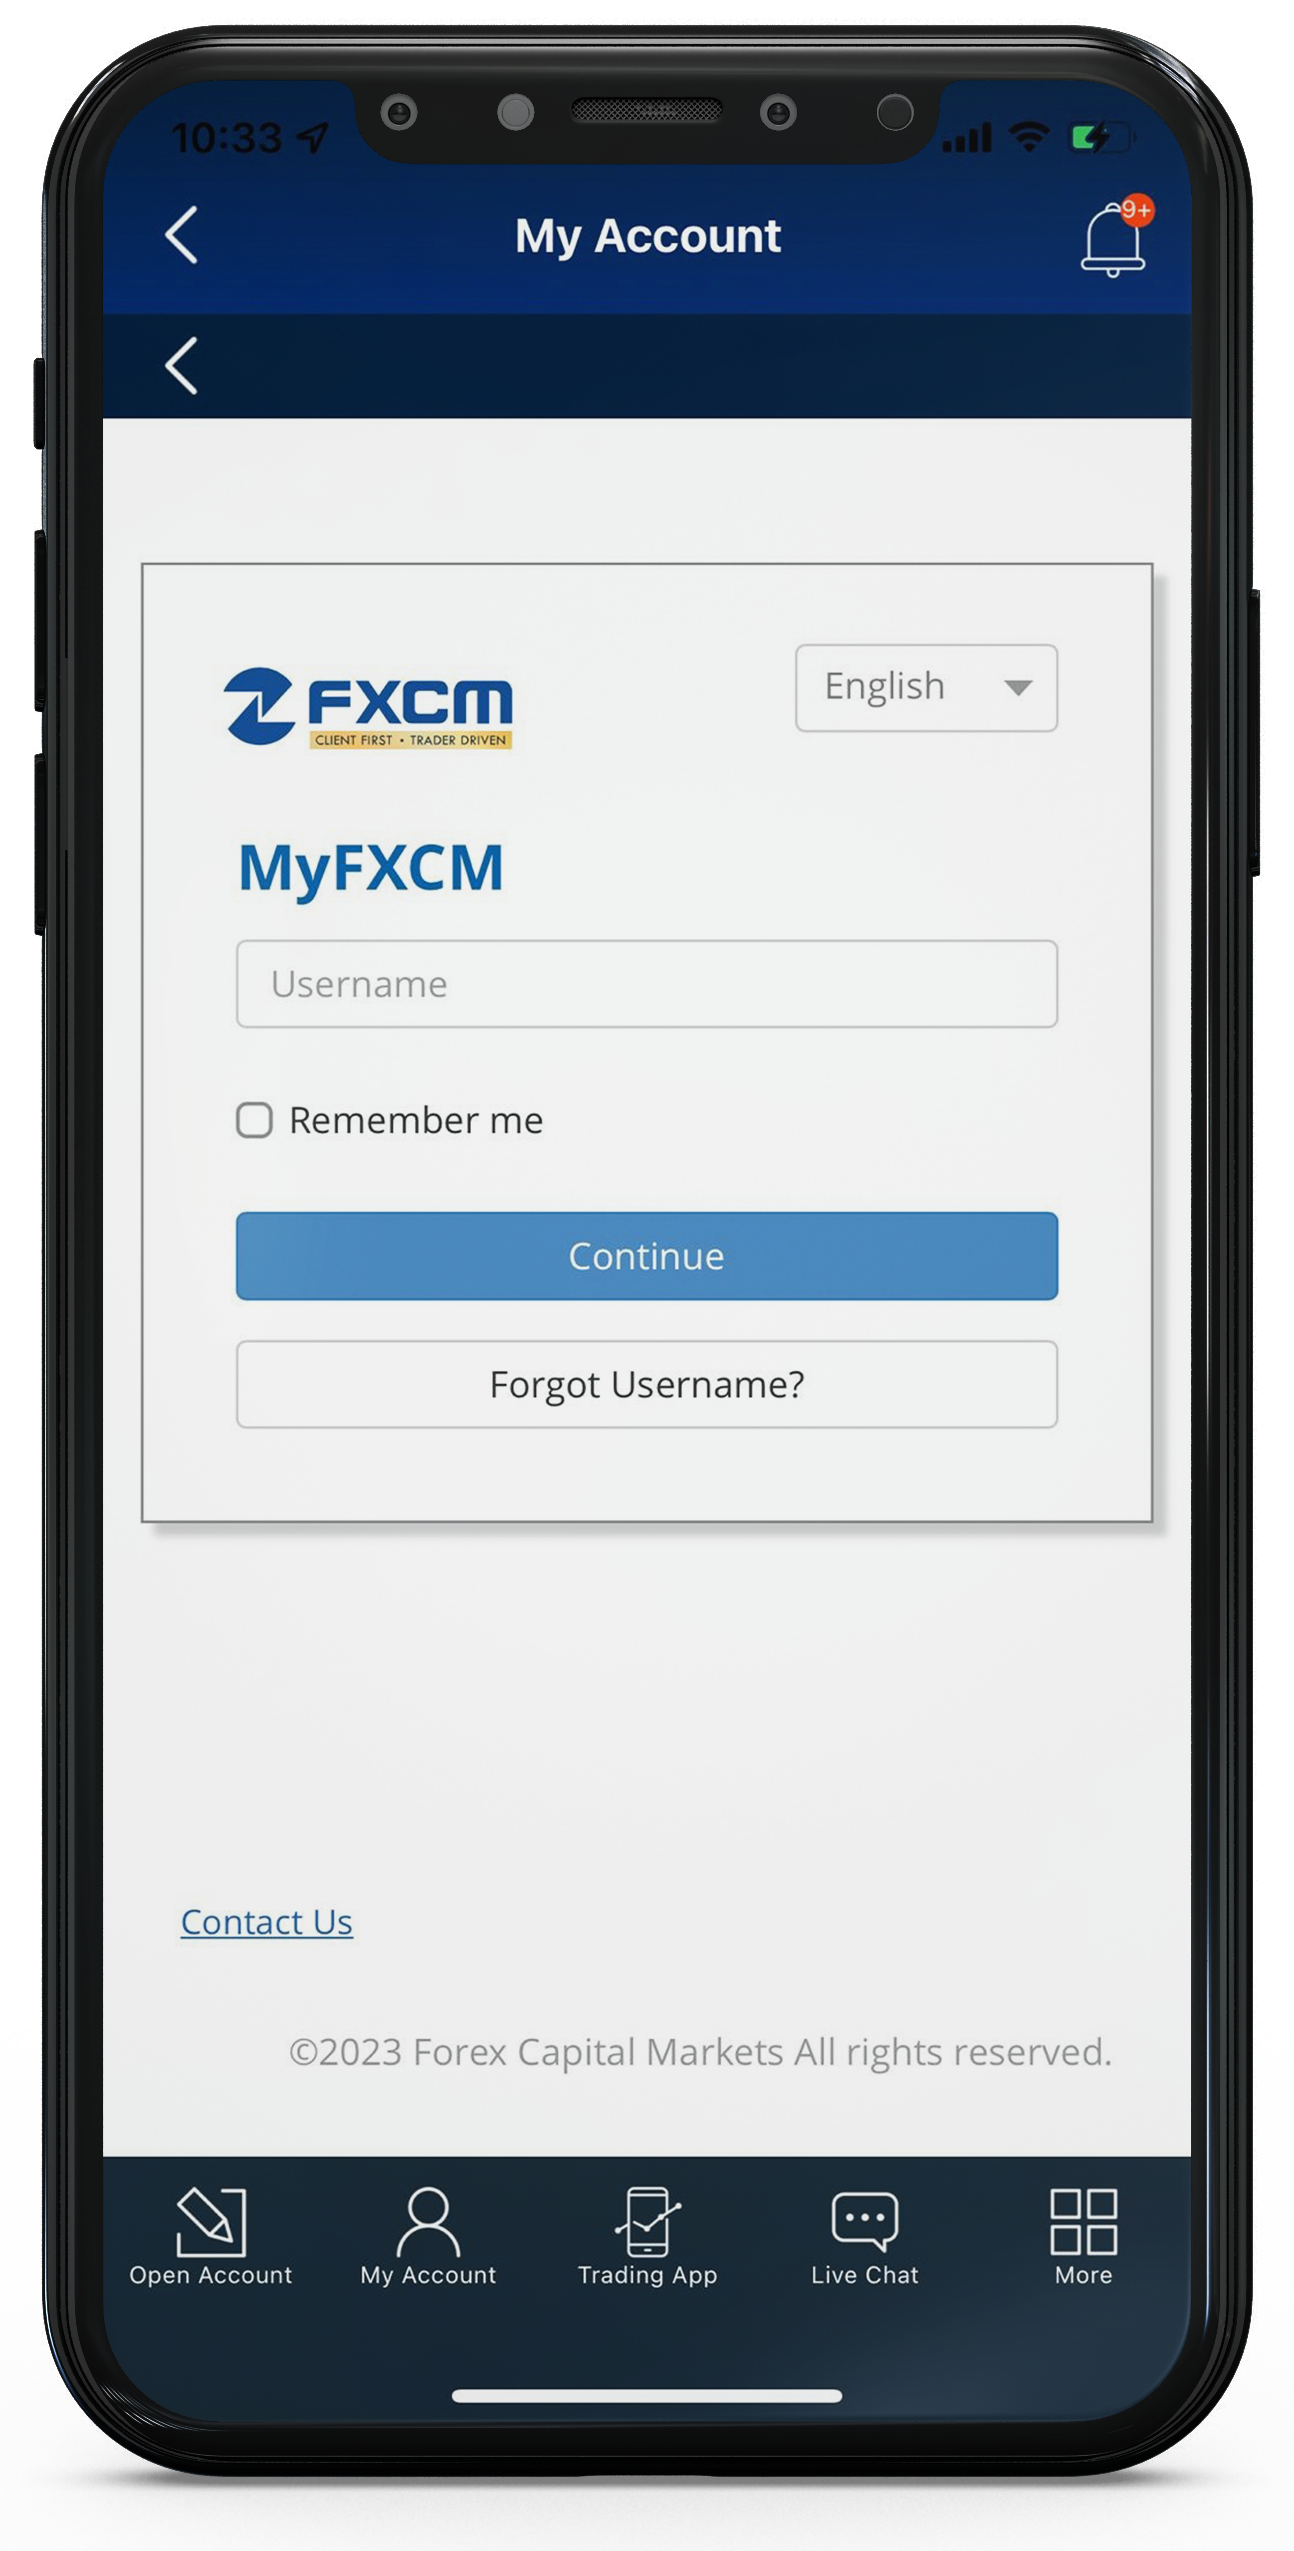 CONNECT WITH FXCM